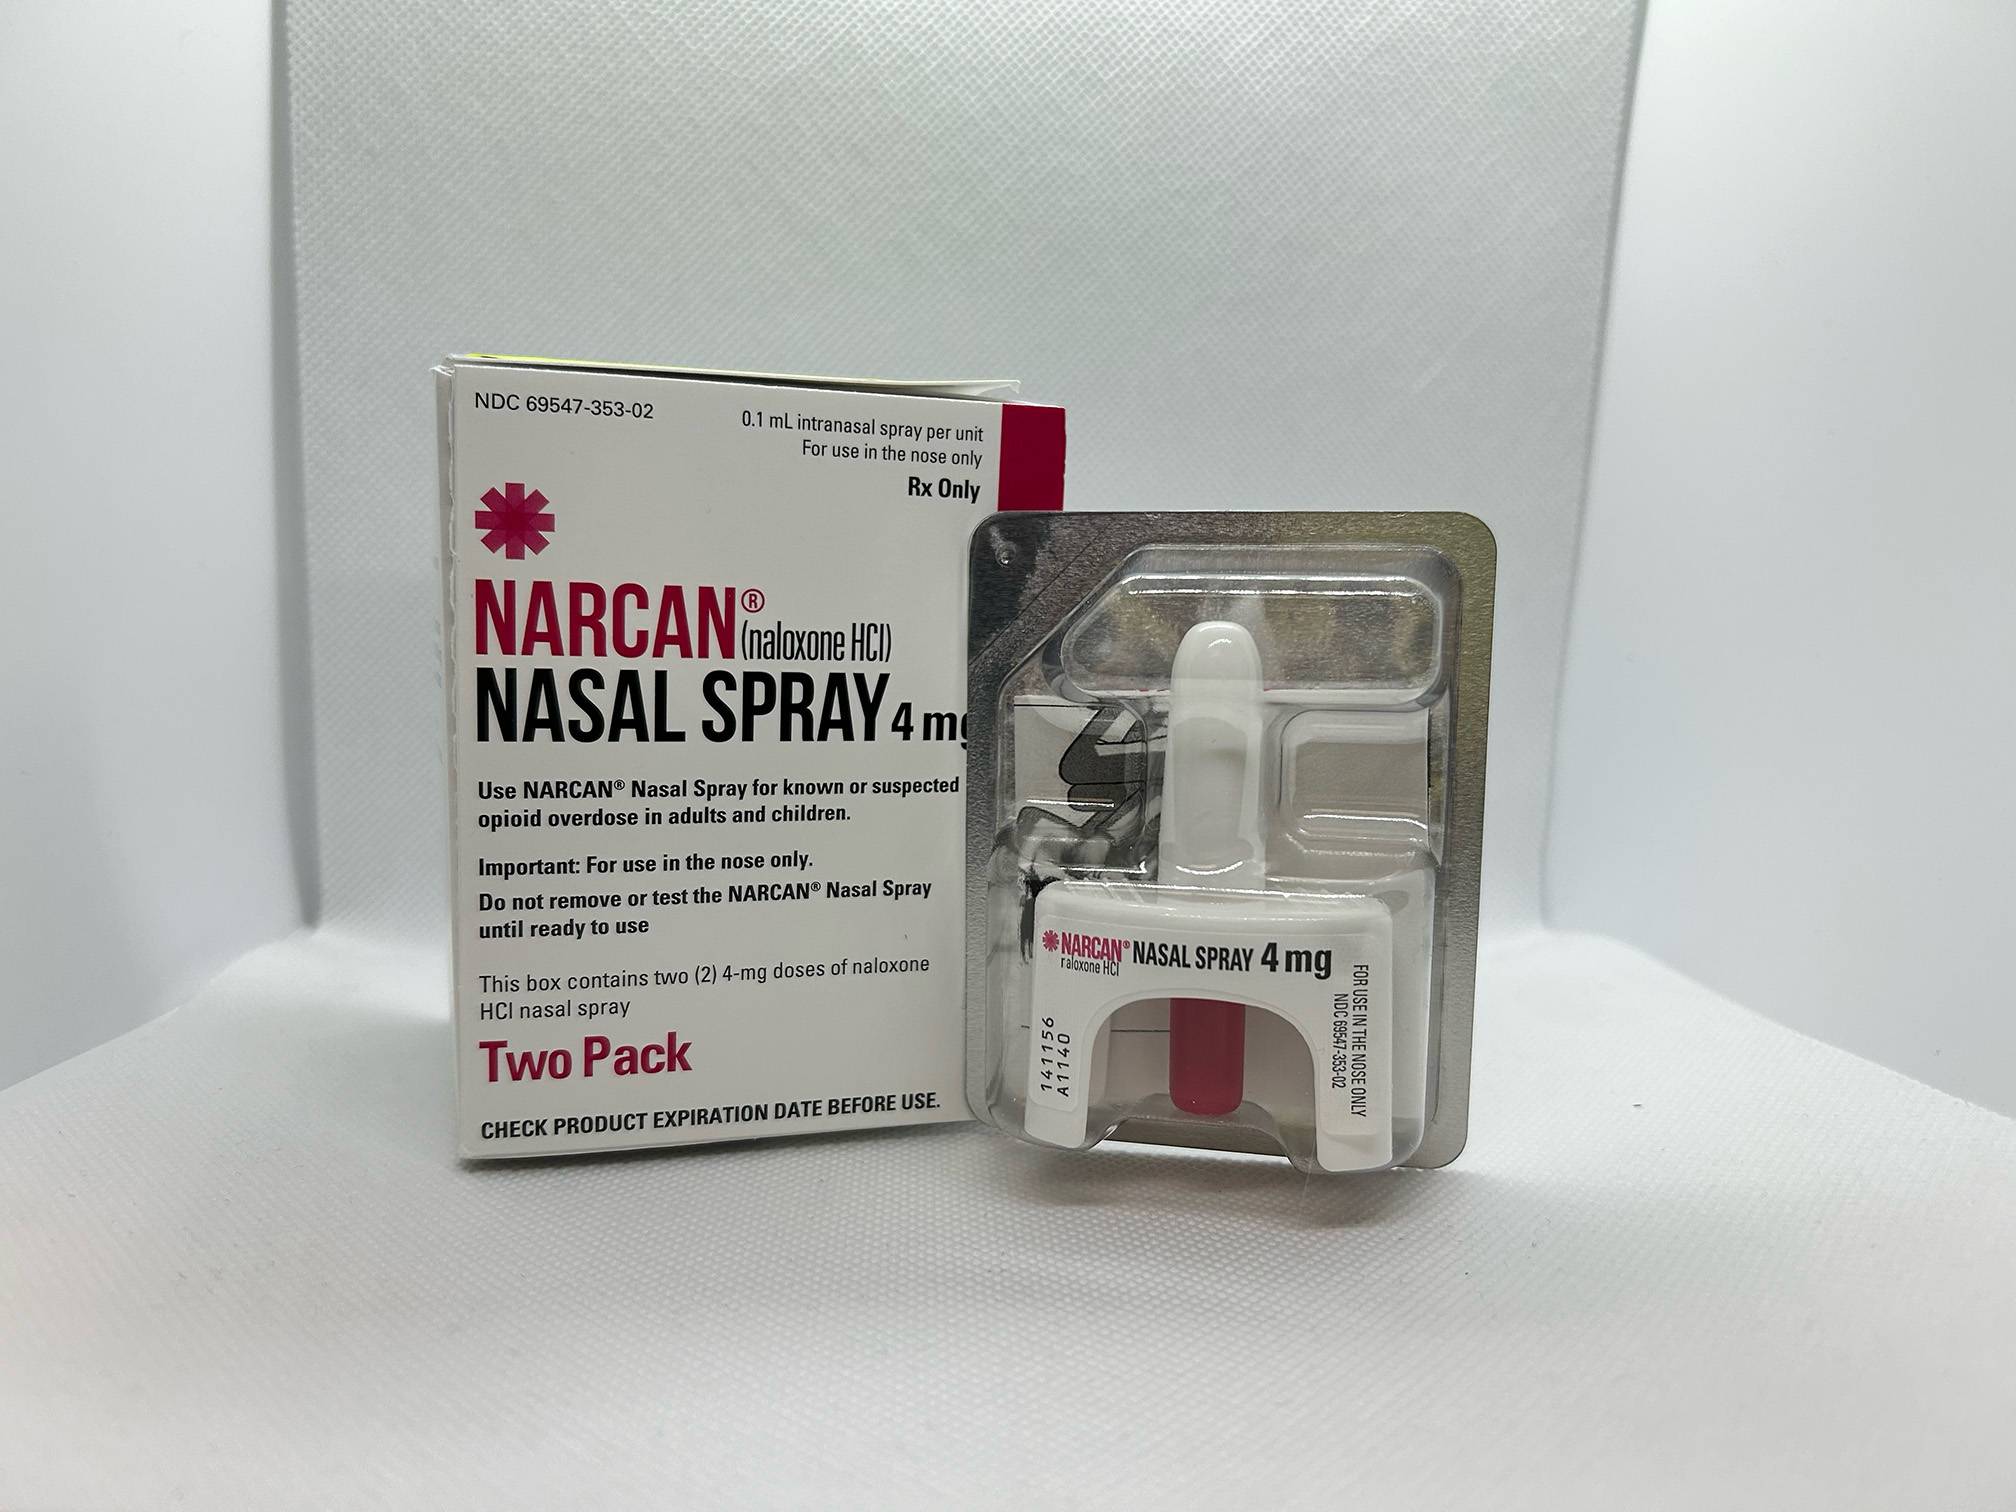 A package containing Narcan nasal spray.